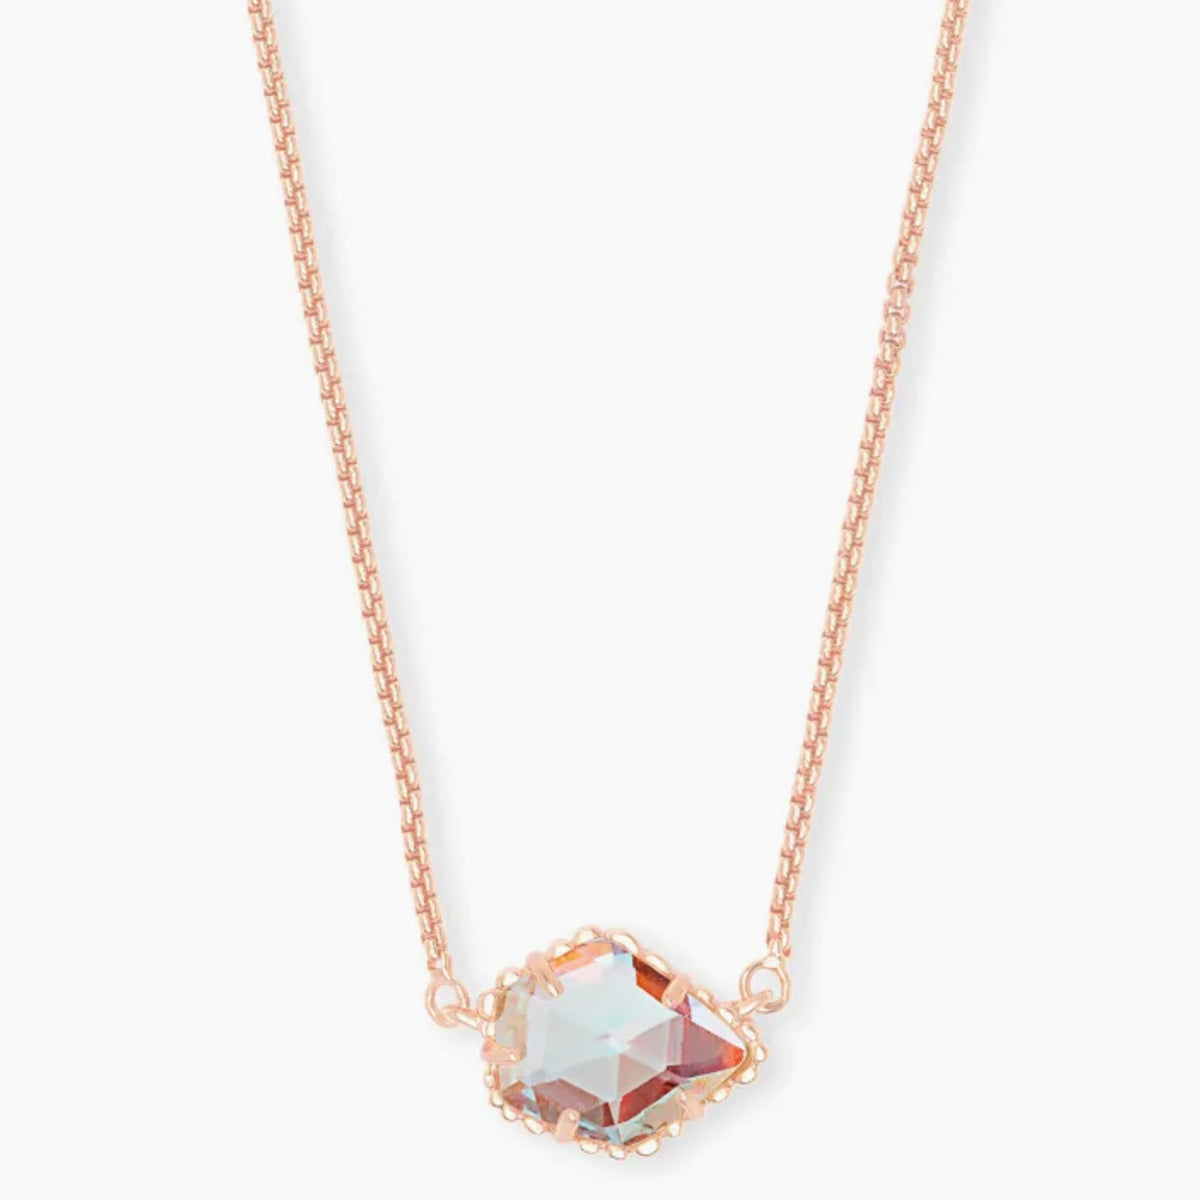 Kendra Scott-Tess Rose Gold Pendant Necklace in Dichroic Glass 4217704130